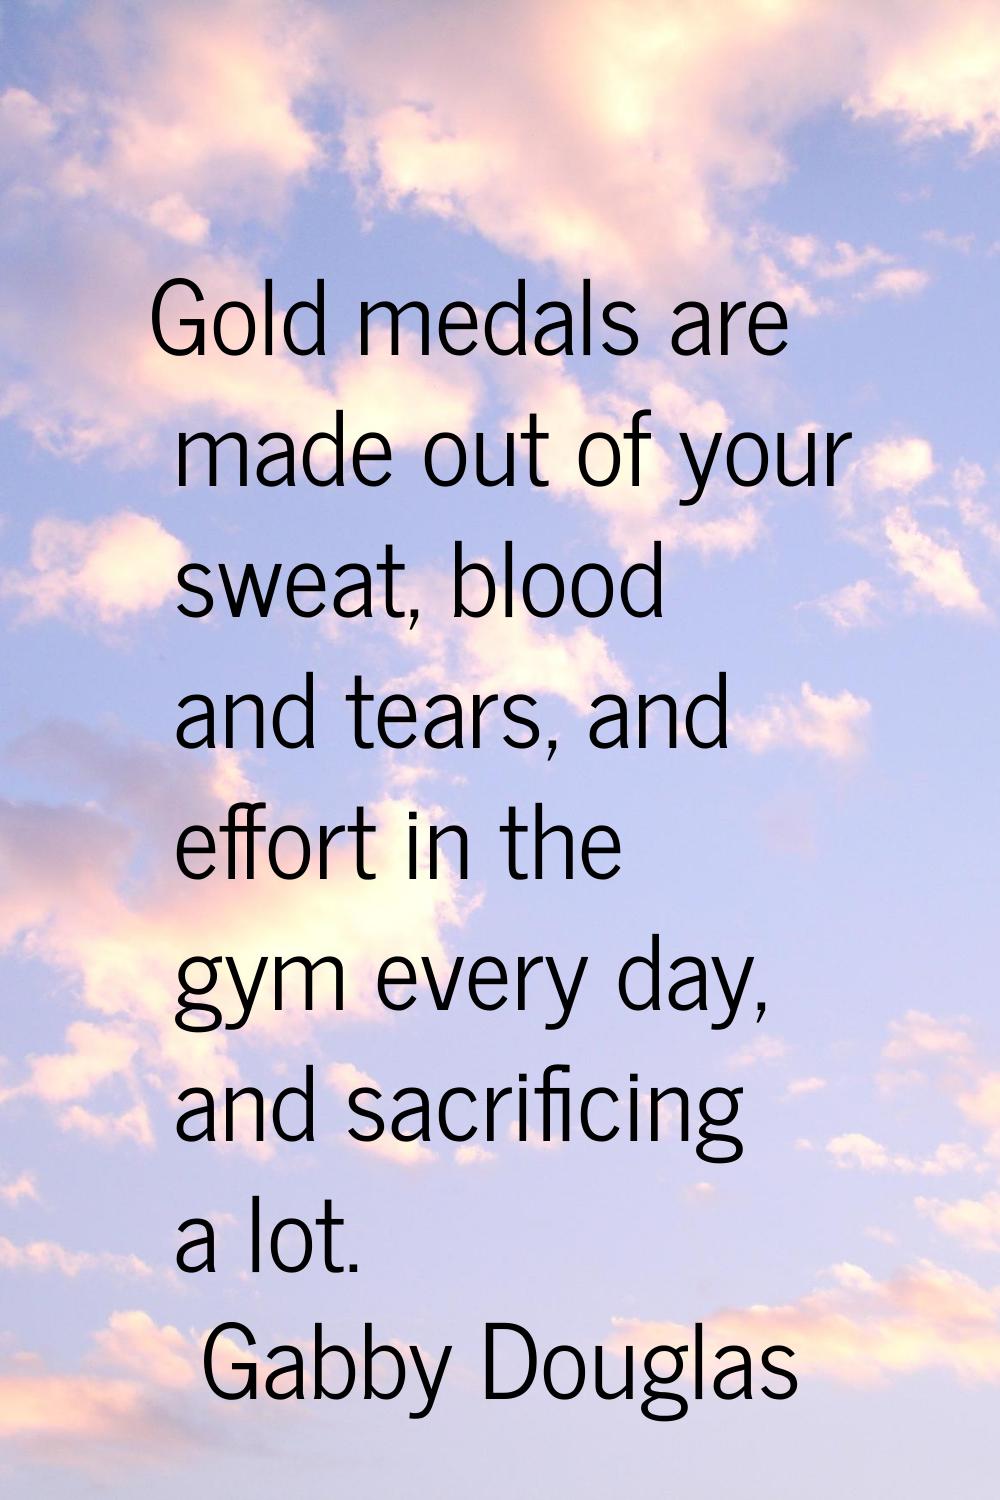 Gold medals are made out of your sweat, blood and tears, and effort in the gym every day, and sacri